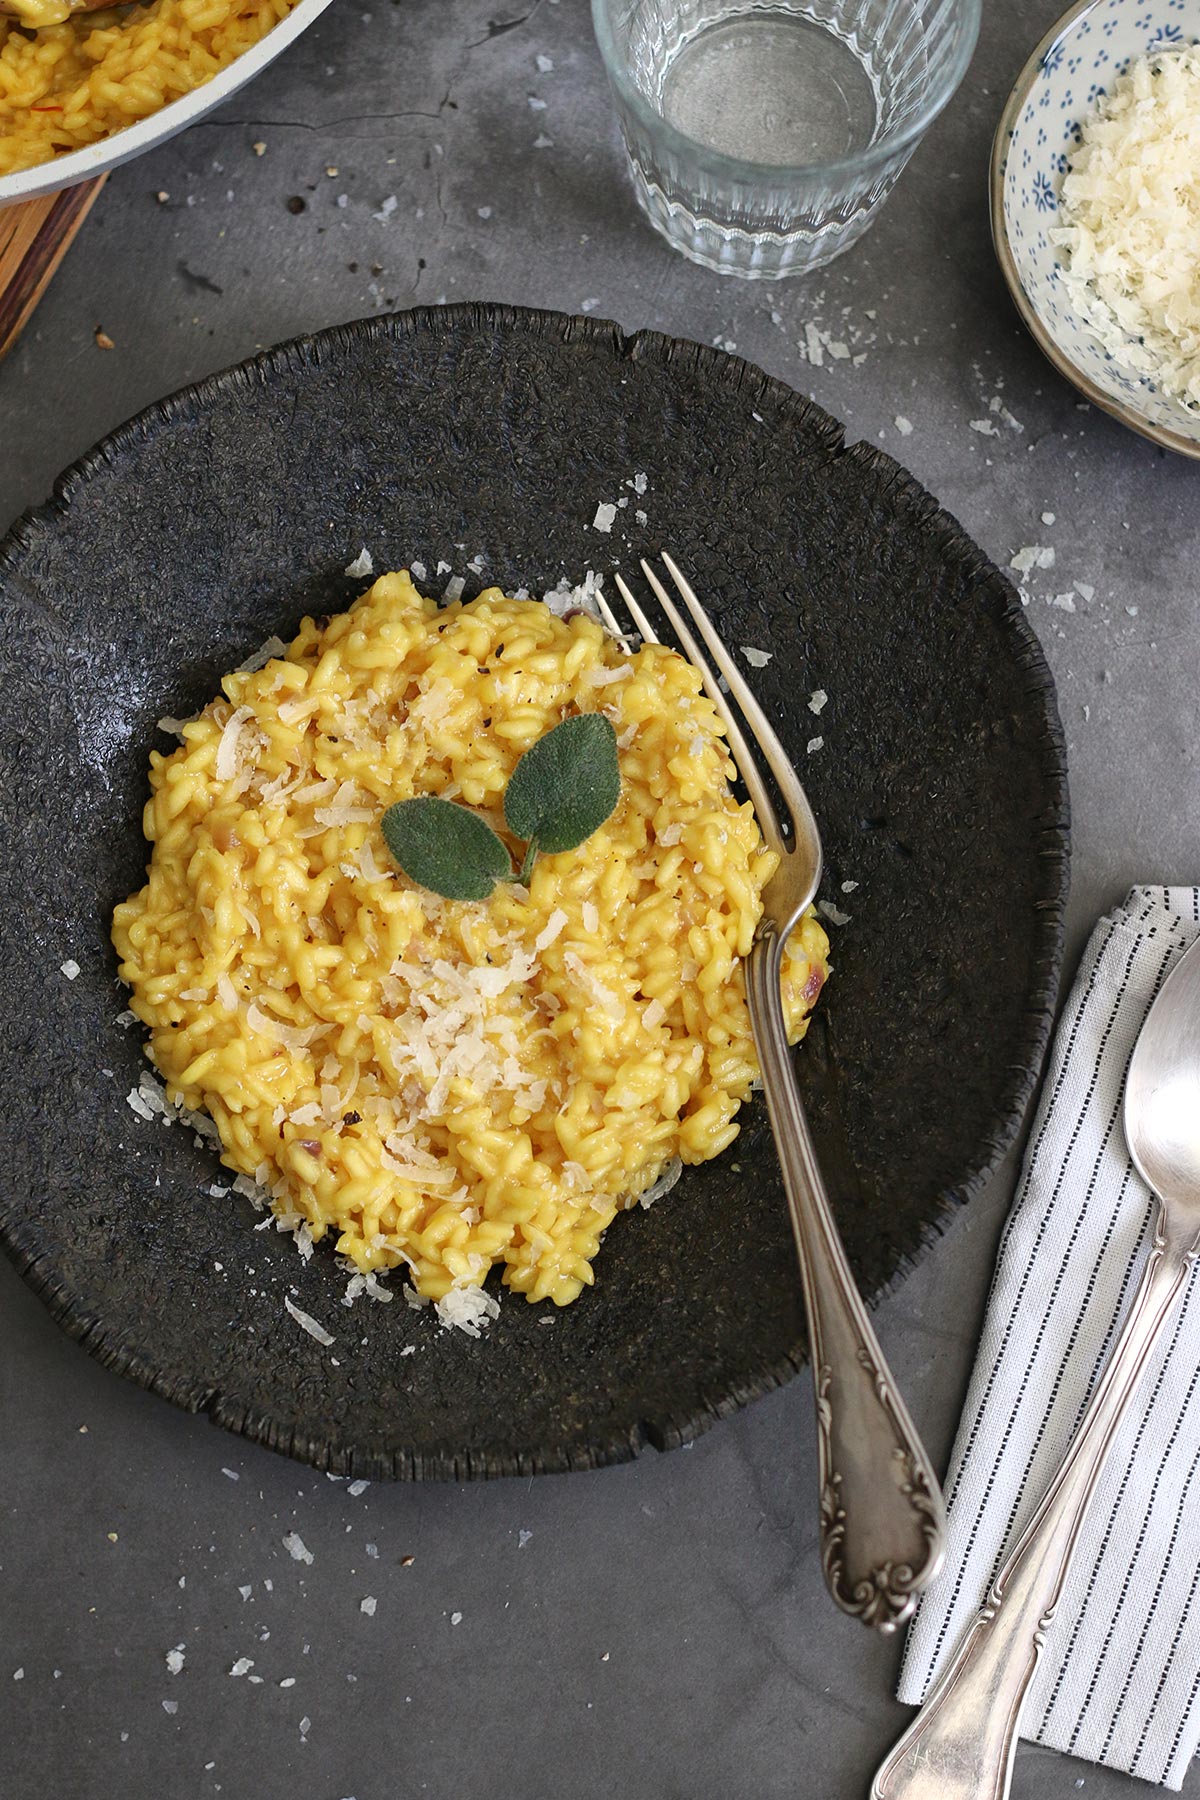 Risotto alla Milanese (mit Safran) | Bake to the roots